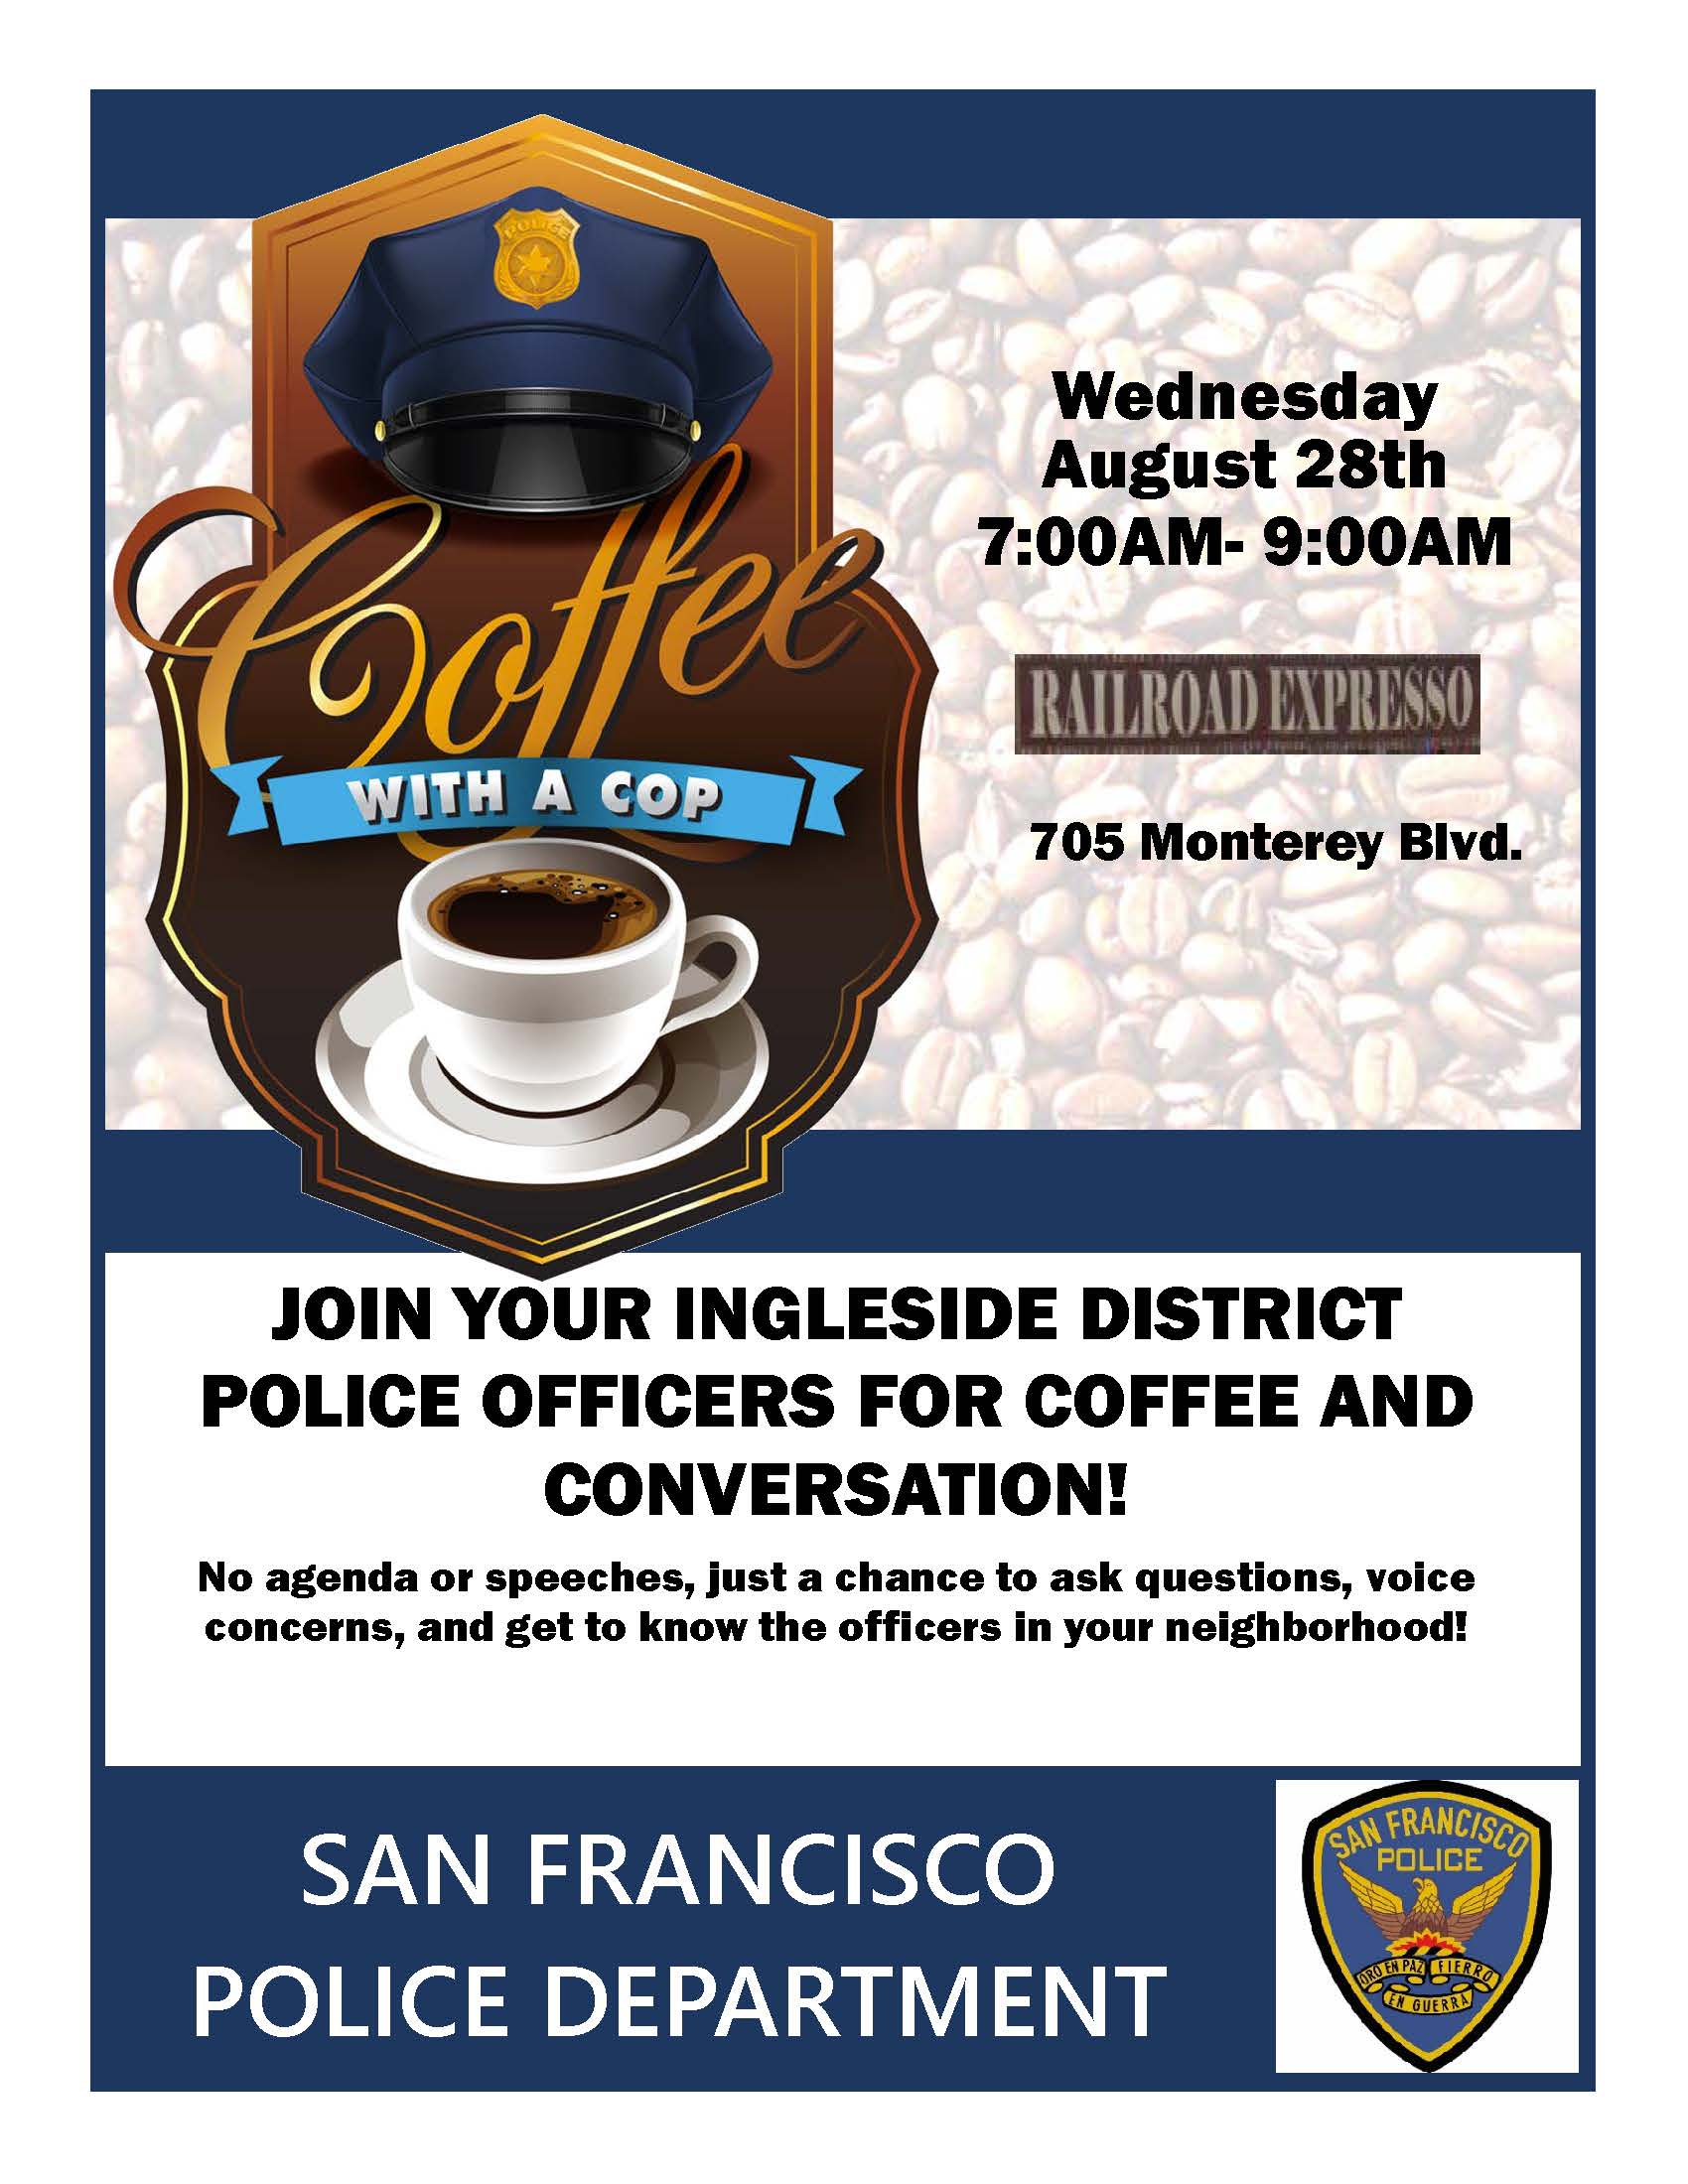 Flyer for Ingleside Coffee with a cop event